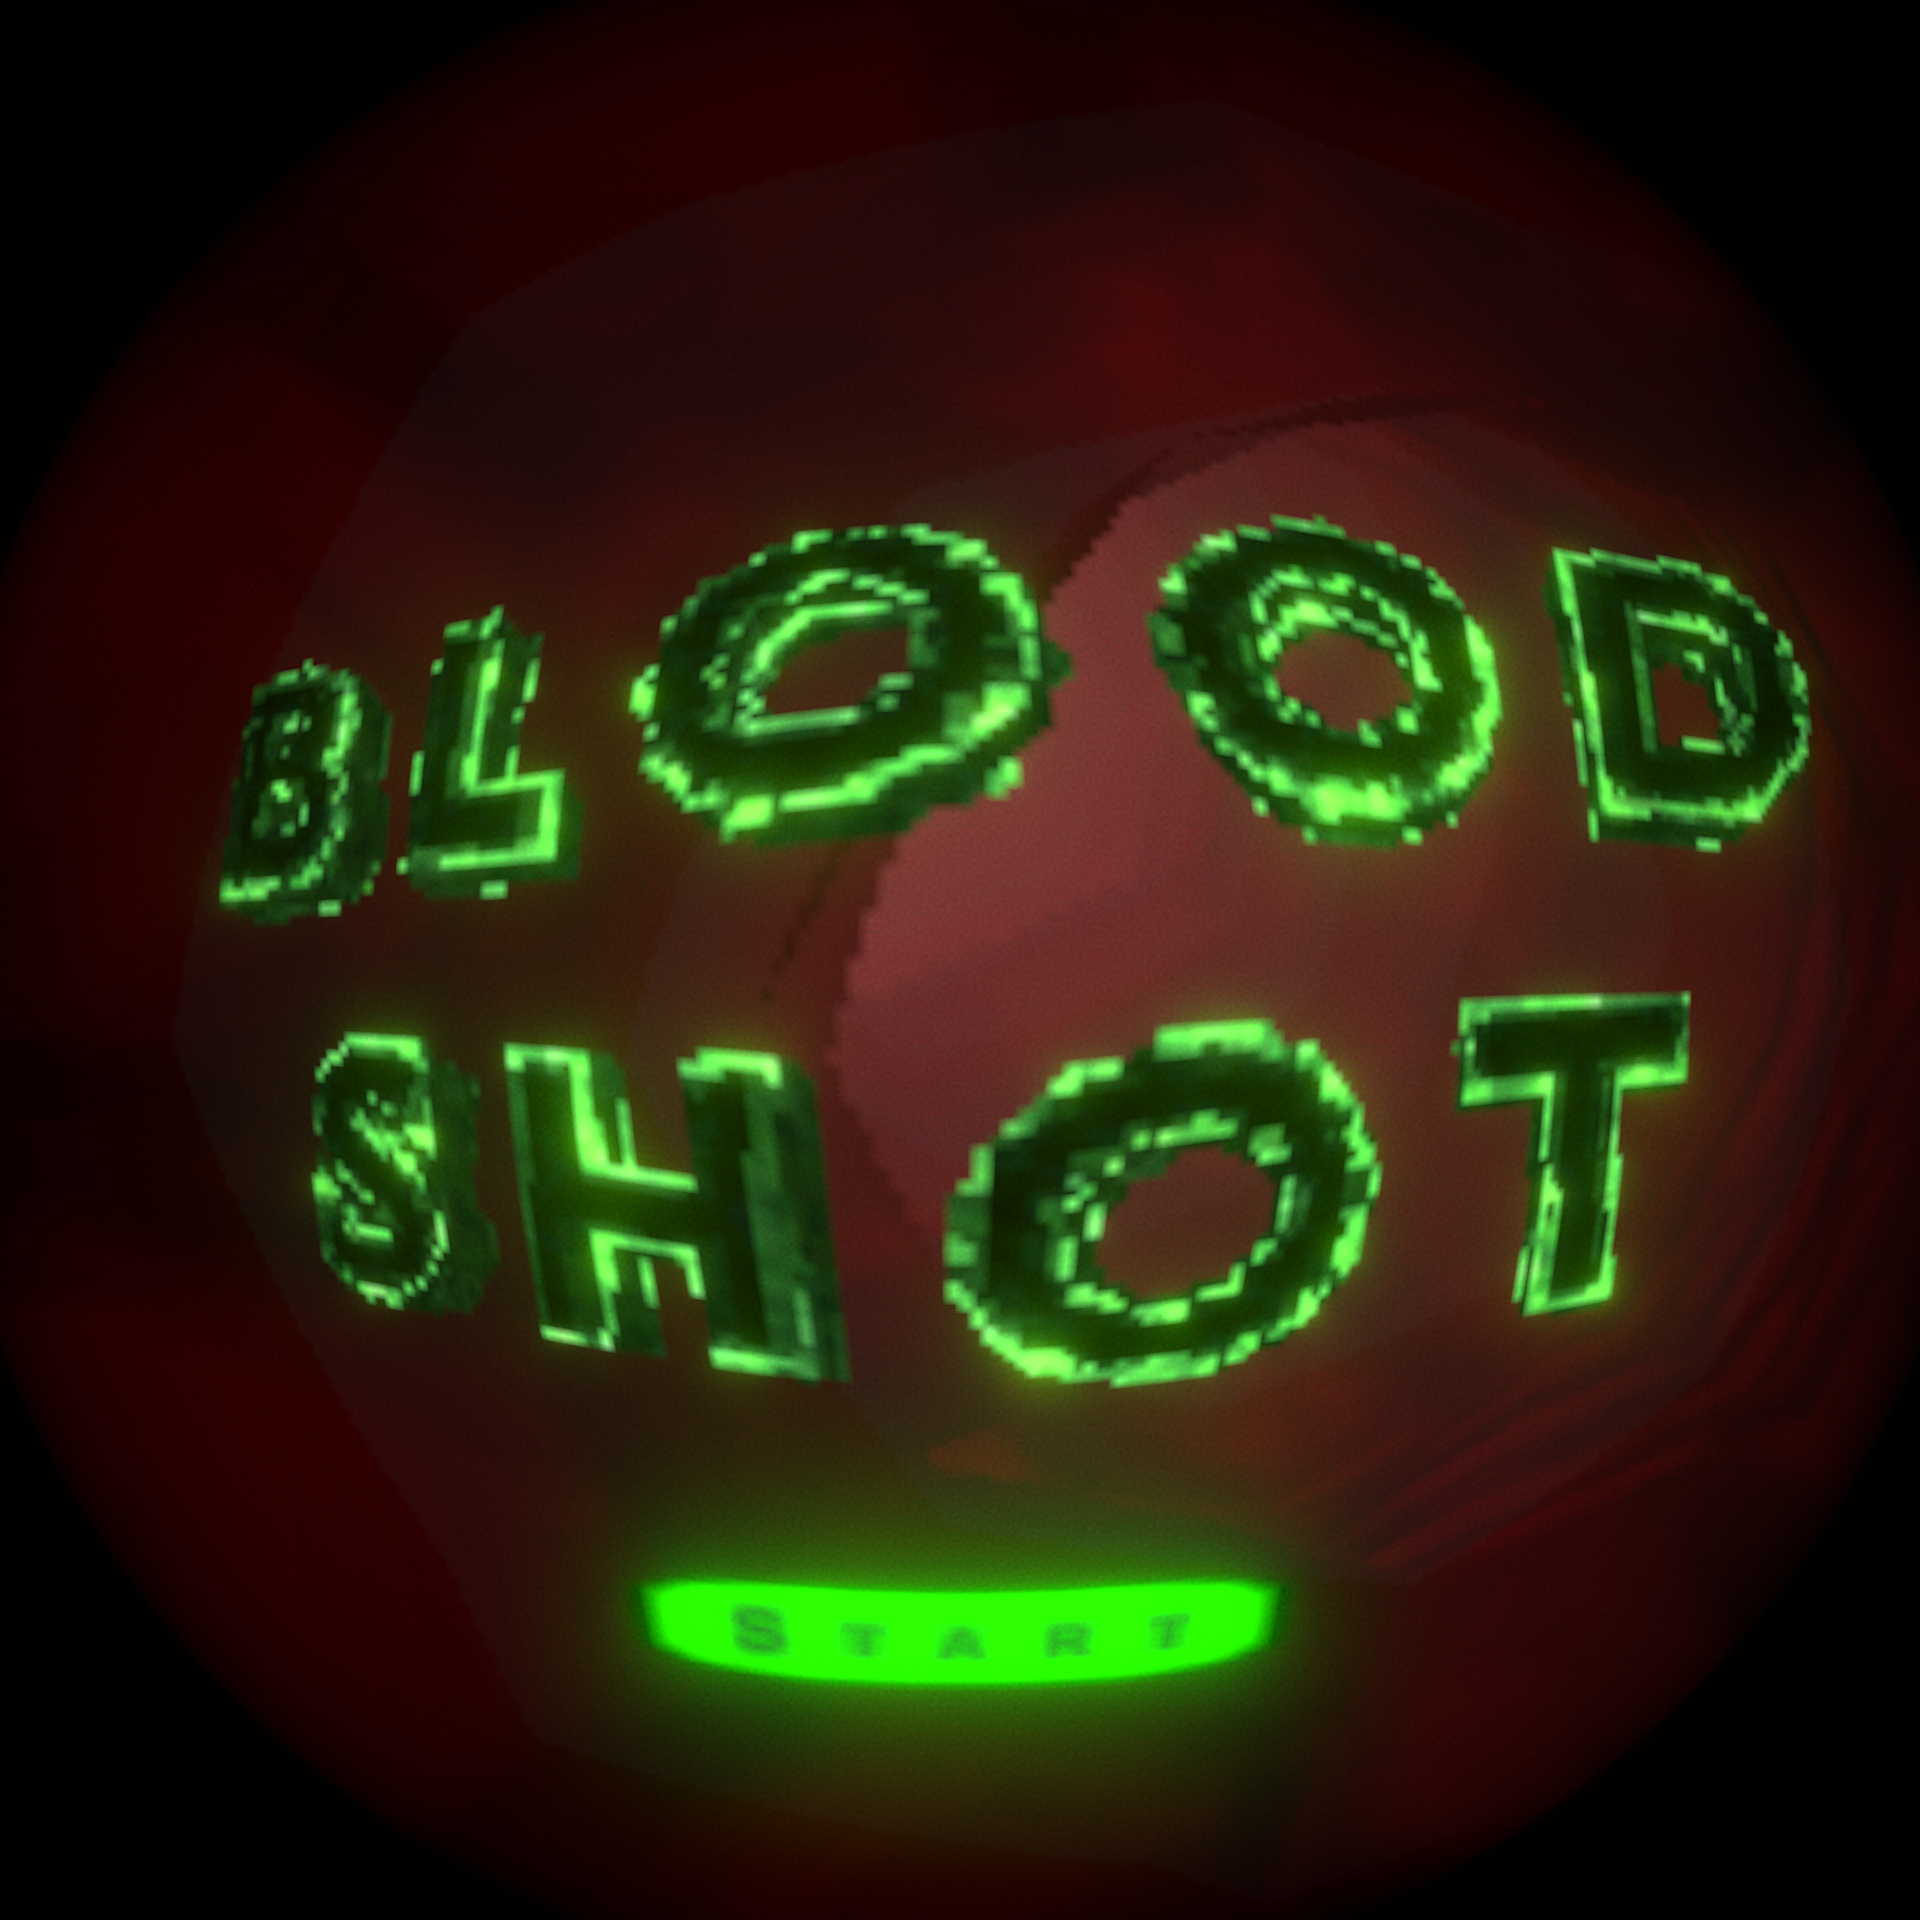 Bright green glowing pixelated text that says "BLOOD SHOT" and a glowing green start button float in a dark red tunnel.